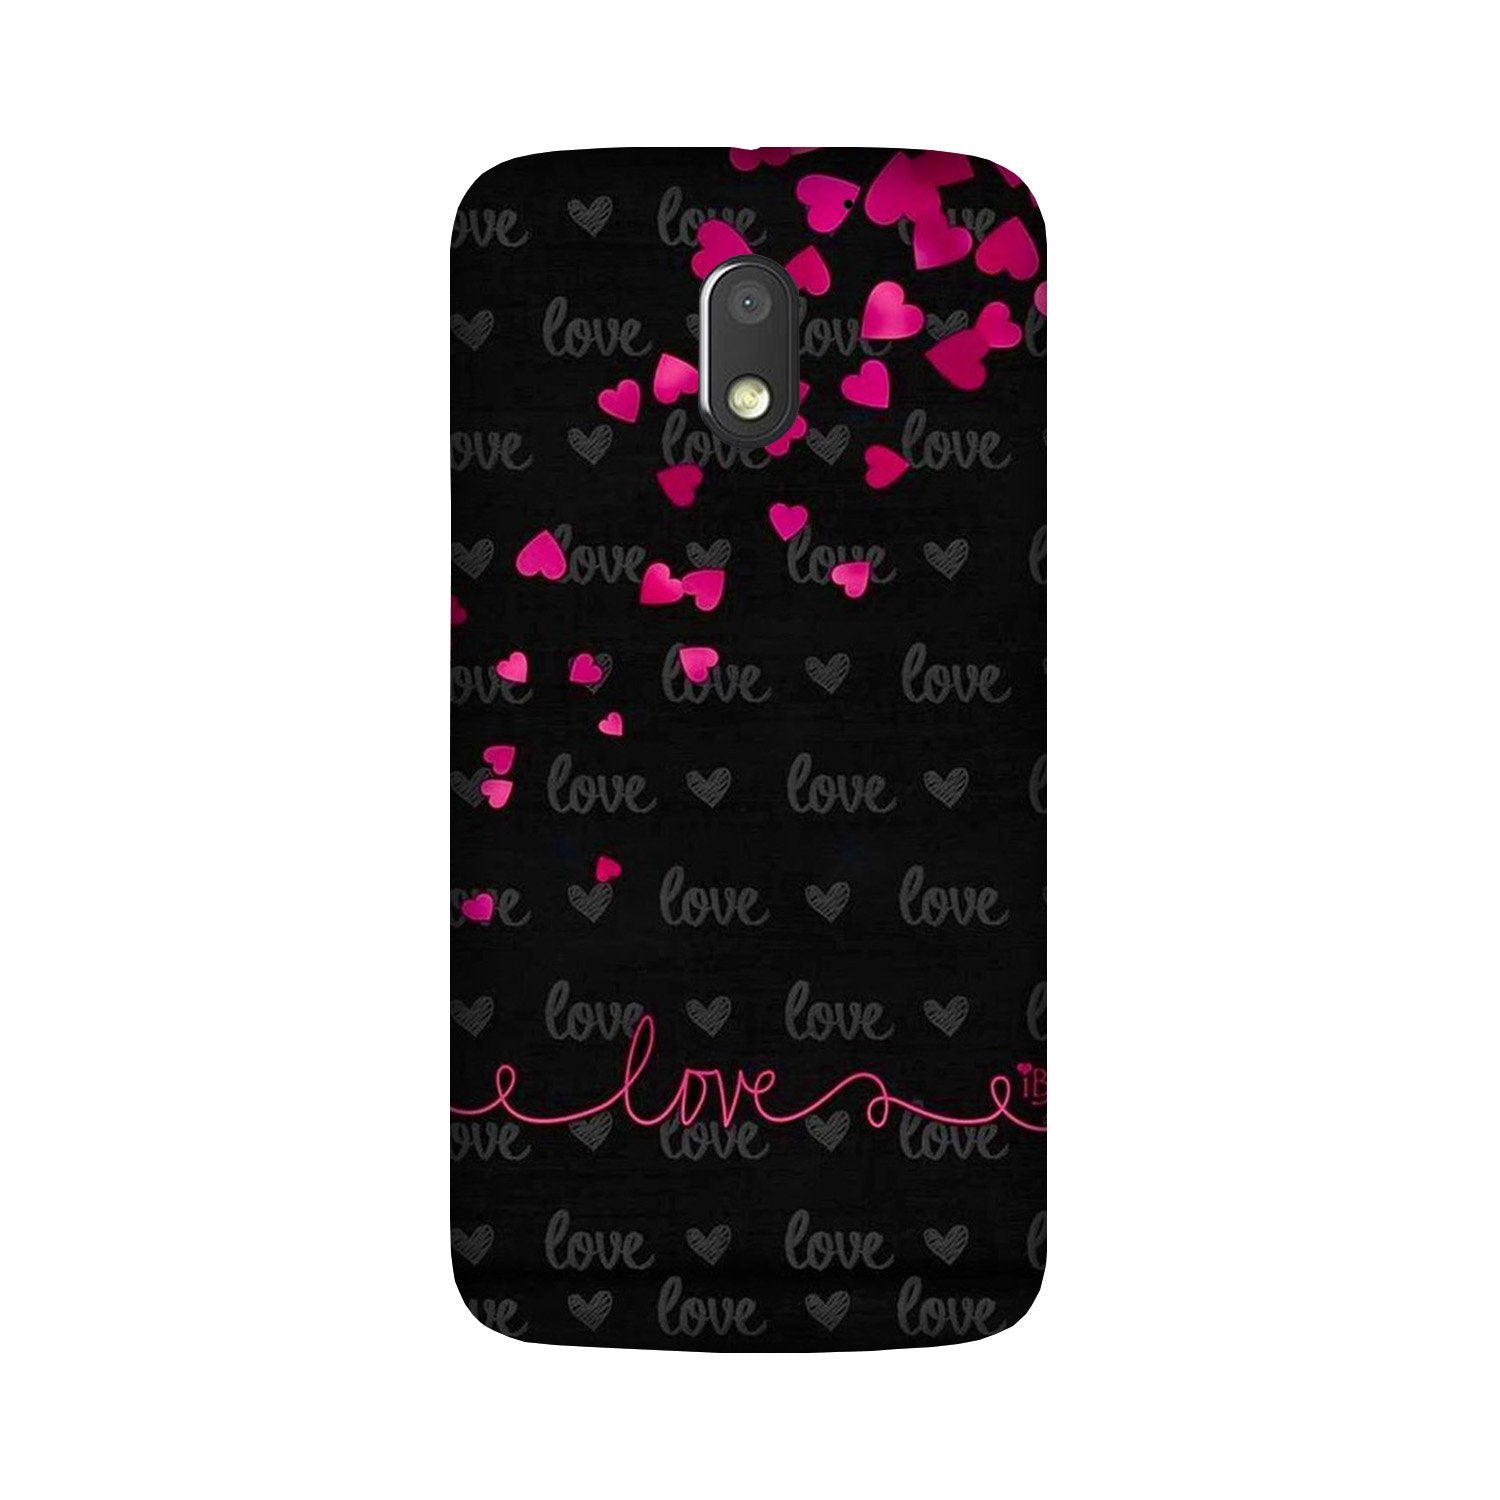 Love in Air Case for Moto G4 Play